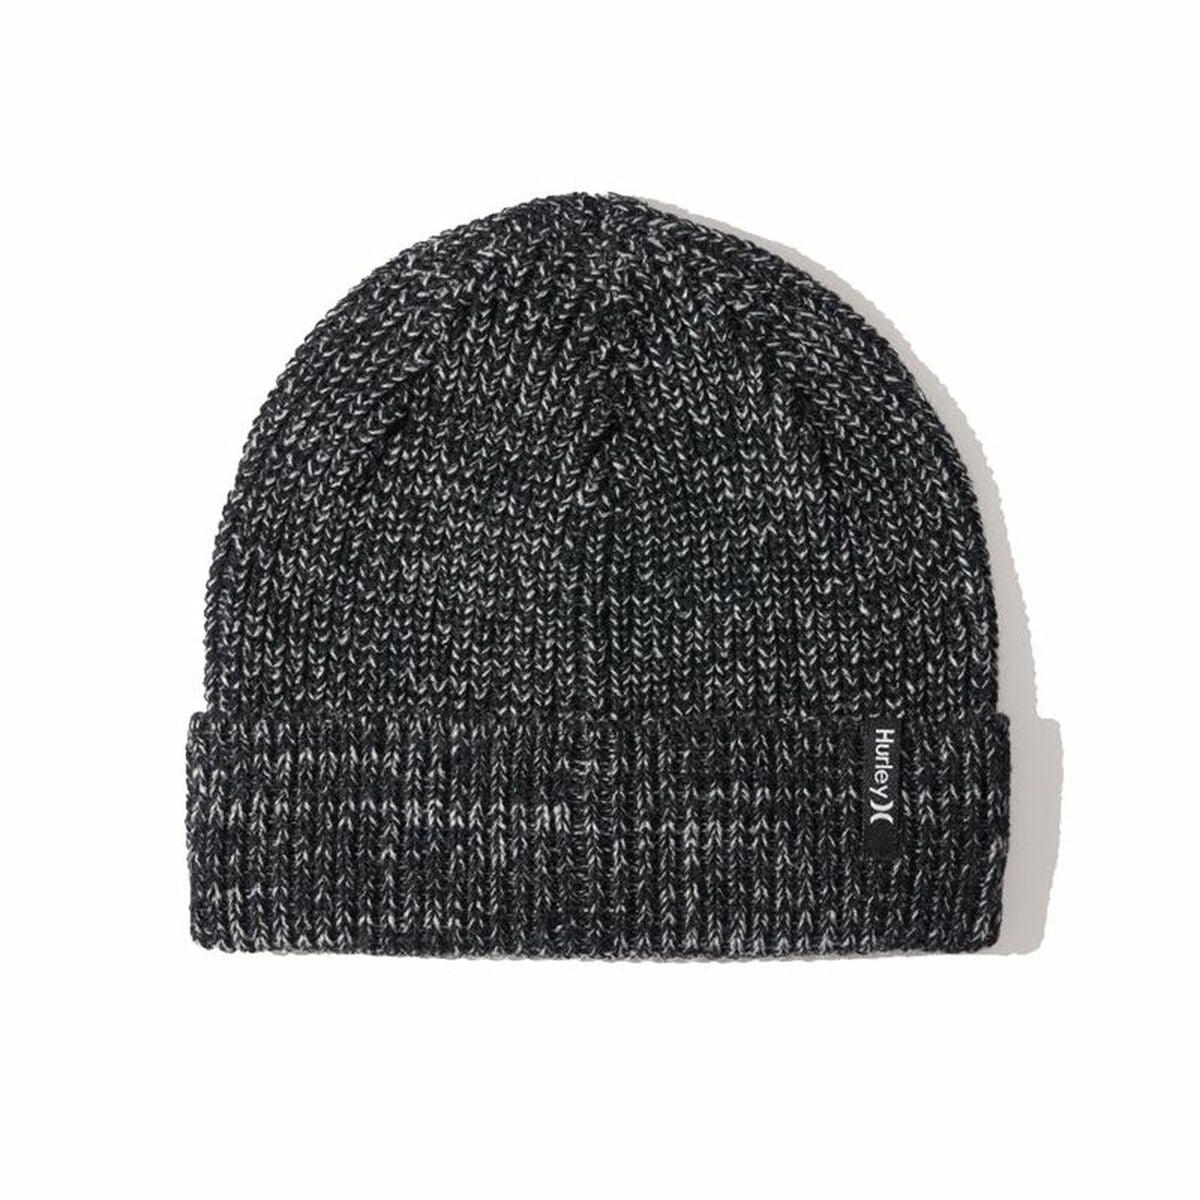 Hat Hurley Max Cuff 2.0 Black - VirtuousWares:Global